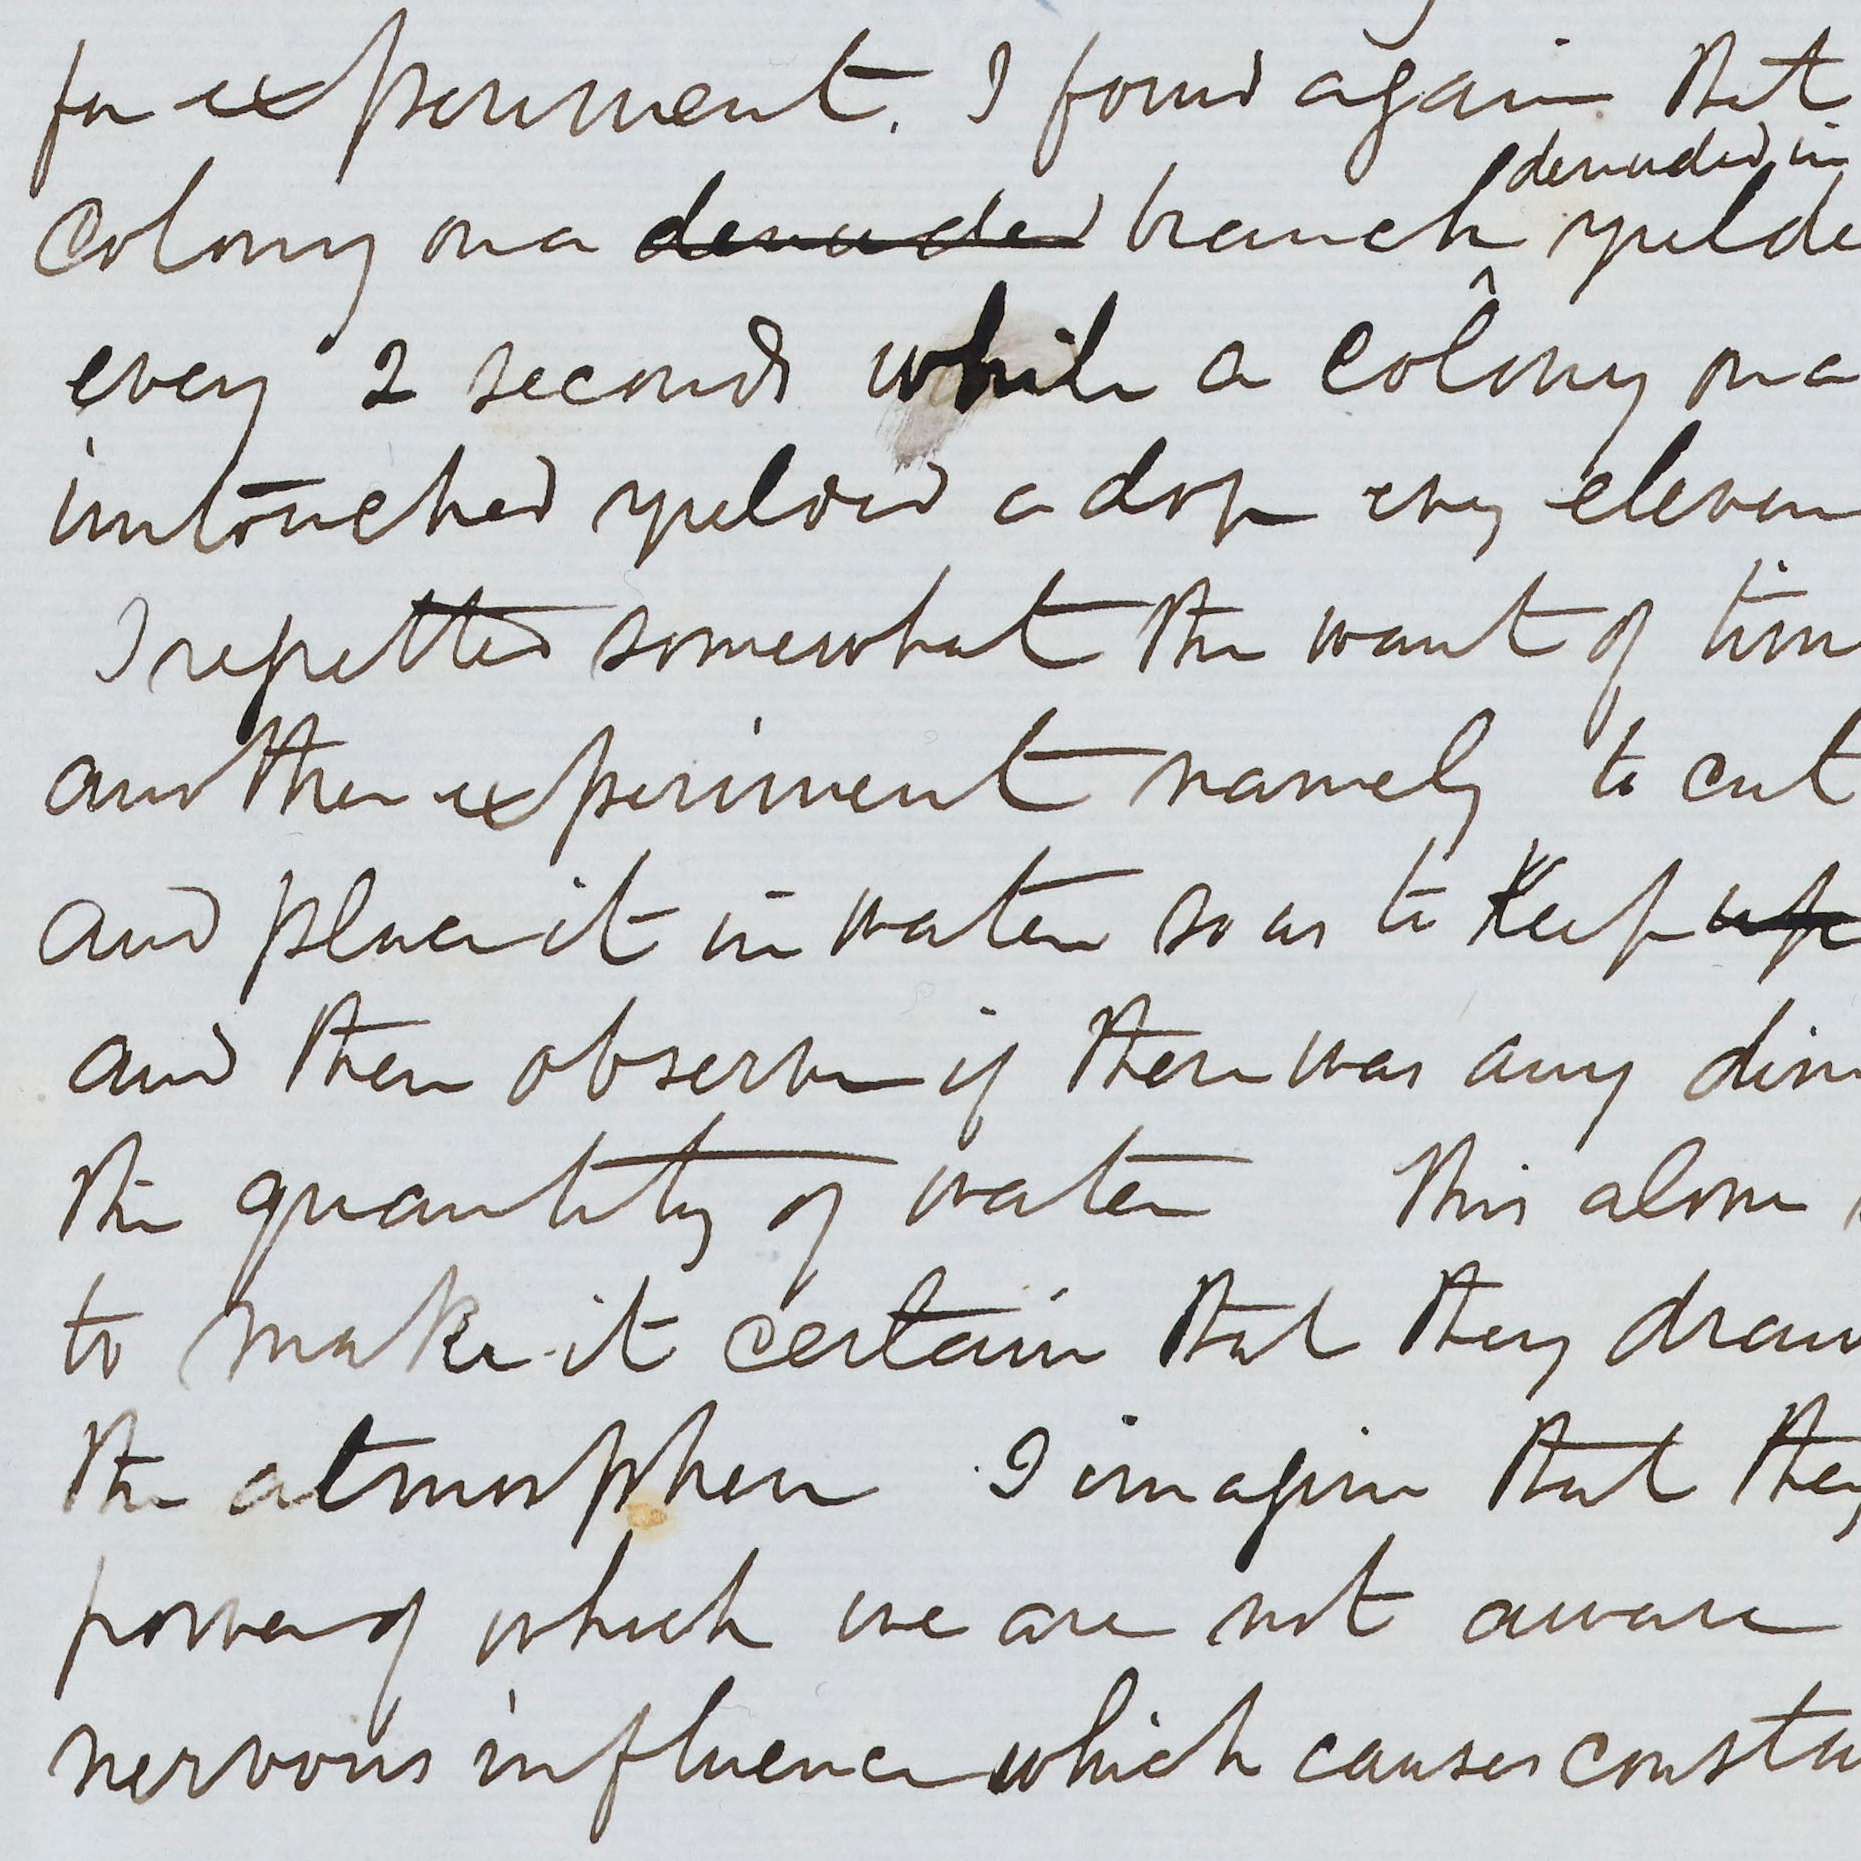 Image of a page segment from the Missionary Travels manuscript (Livingstone 1857dd:[97]), detail. Copyright National Library of Scotland. Creative Commons Share-alike 2.5 UK: Scotland (https://creativecommons.org/licenses/by-nc-sa/2.5/scotland/).